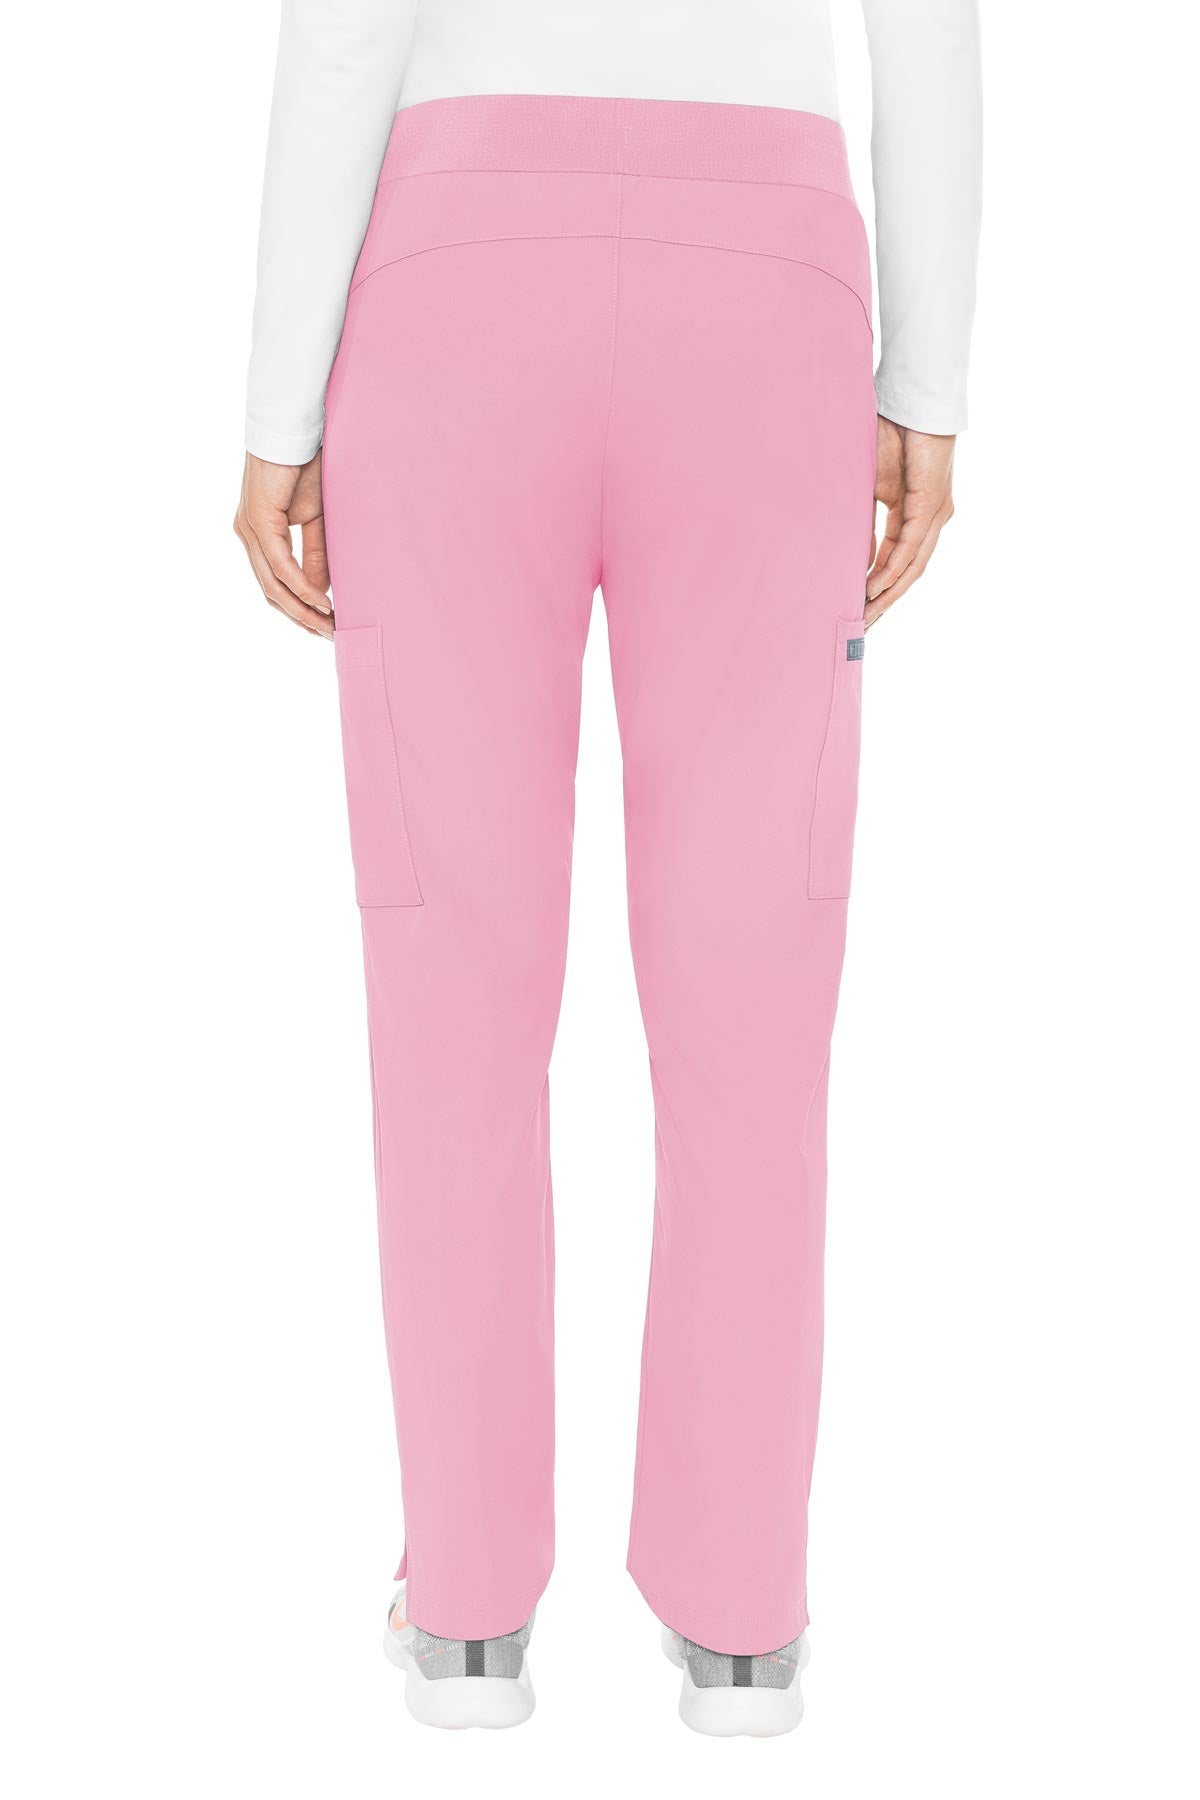 Med Couture Peaches Scoop Pocket Pant Tall Length (XS-XL)